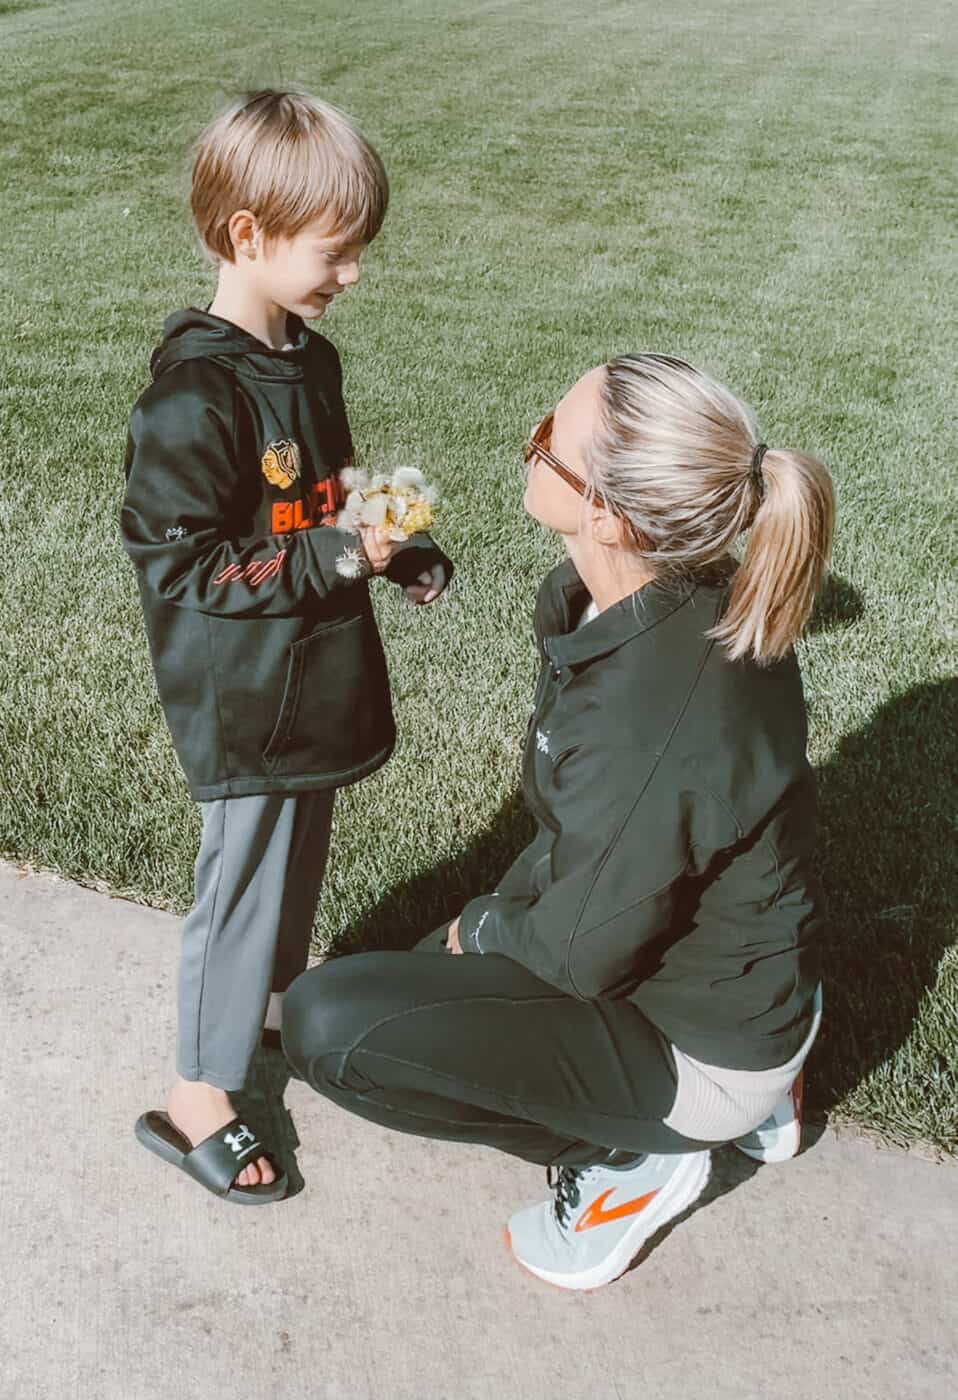 Mother and son connect through eye contact and body language. This is an example of how a parent can co-regulate through attentiveness.